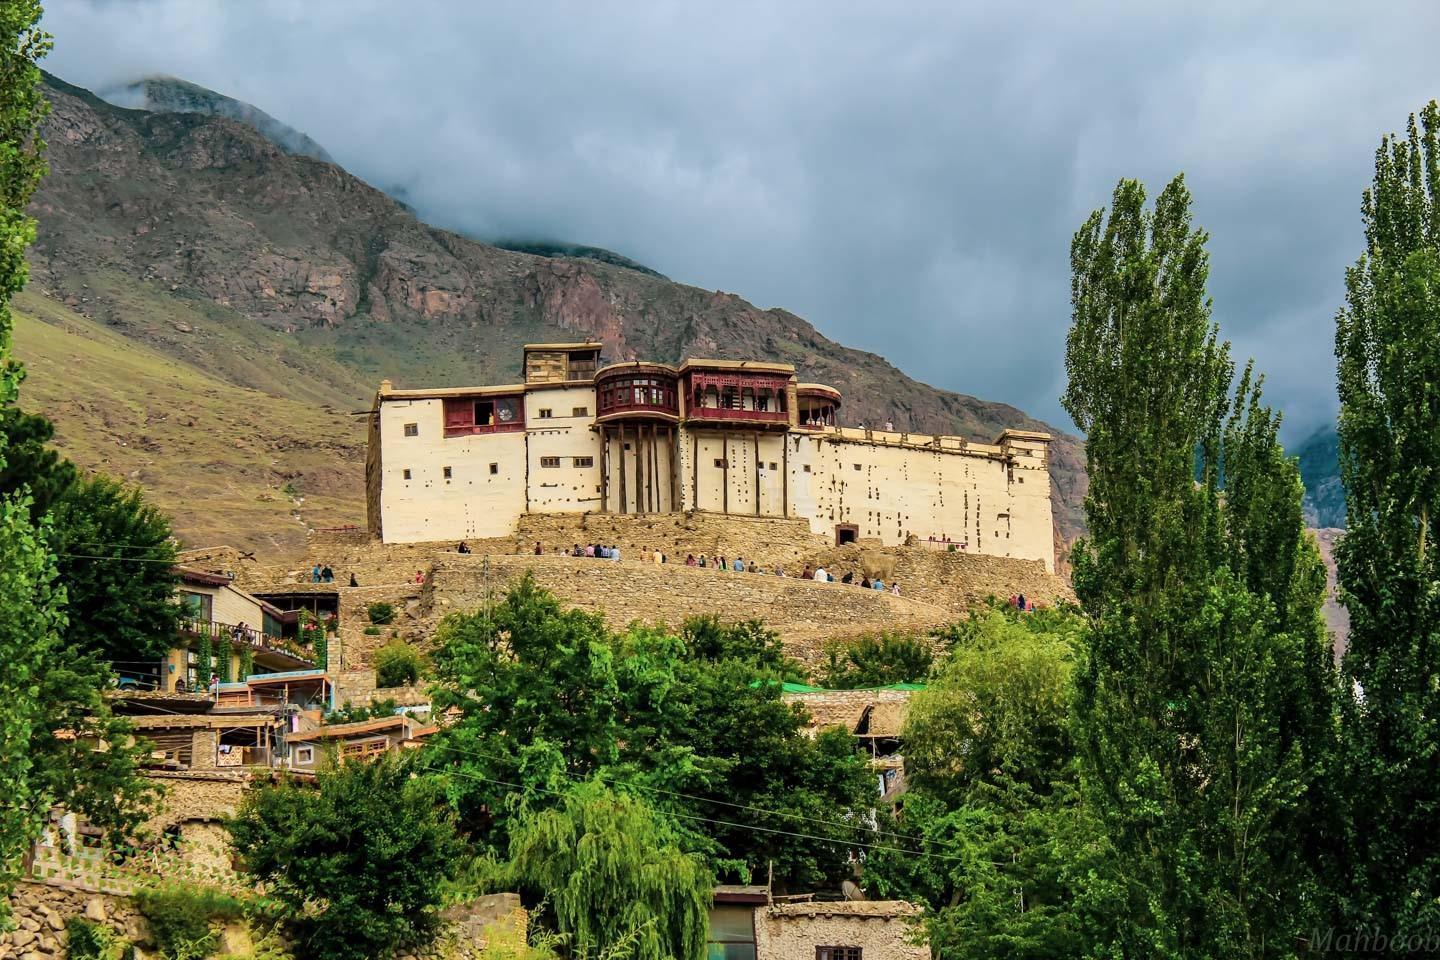 Baltit Fort, strategically important in the past is significant today as a tourist attraction